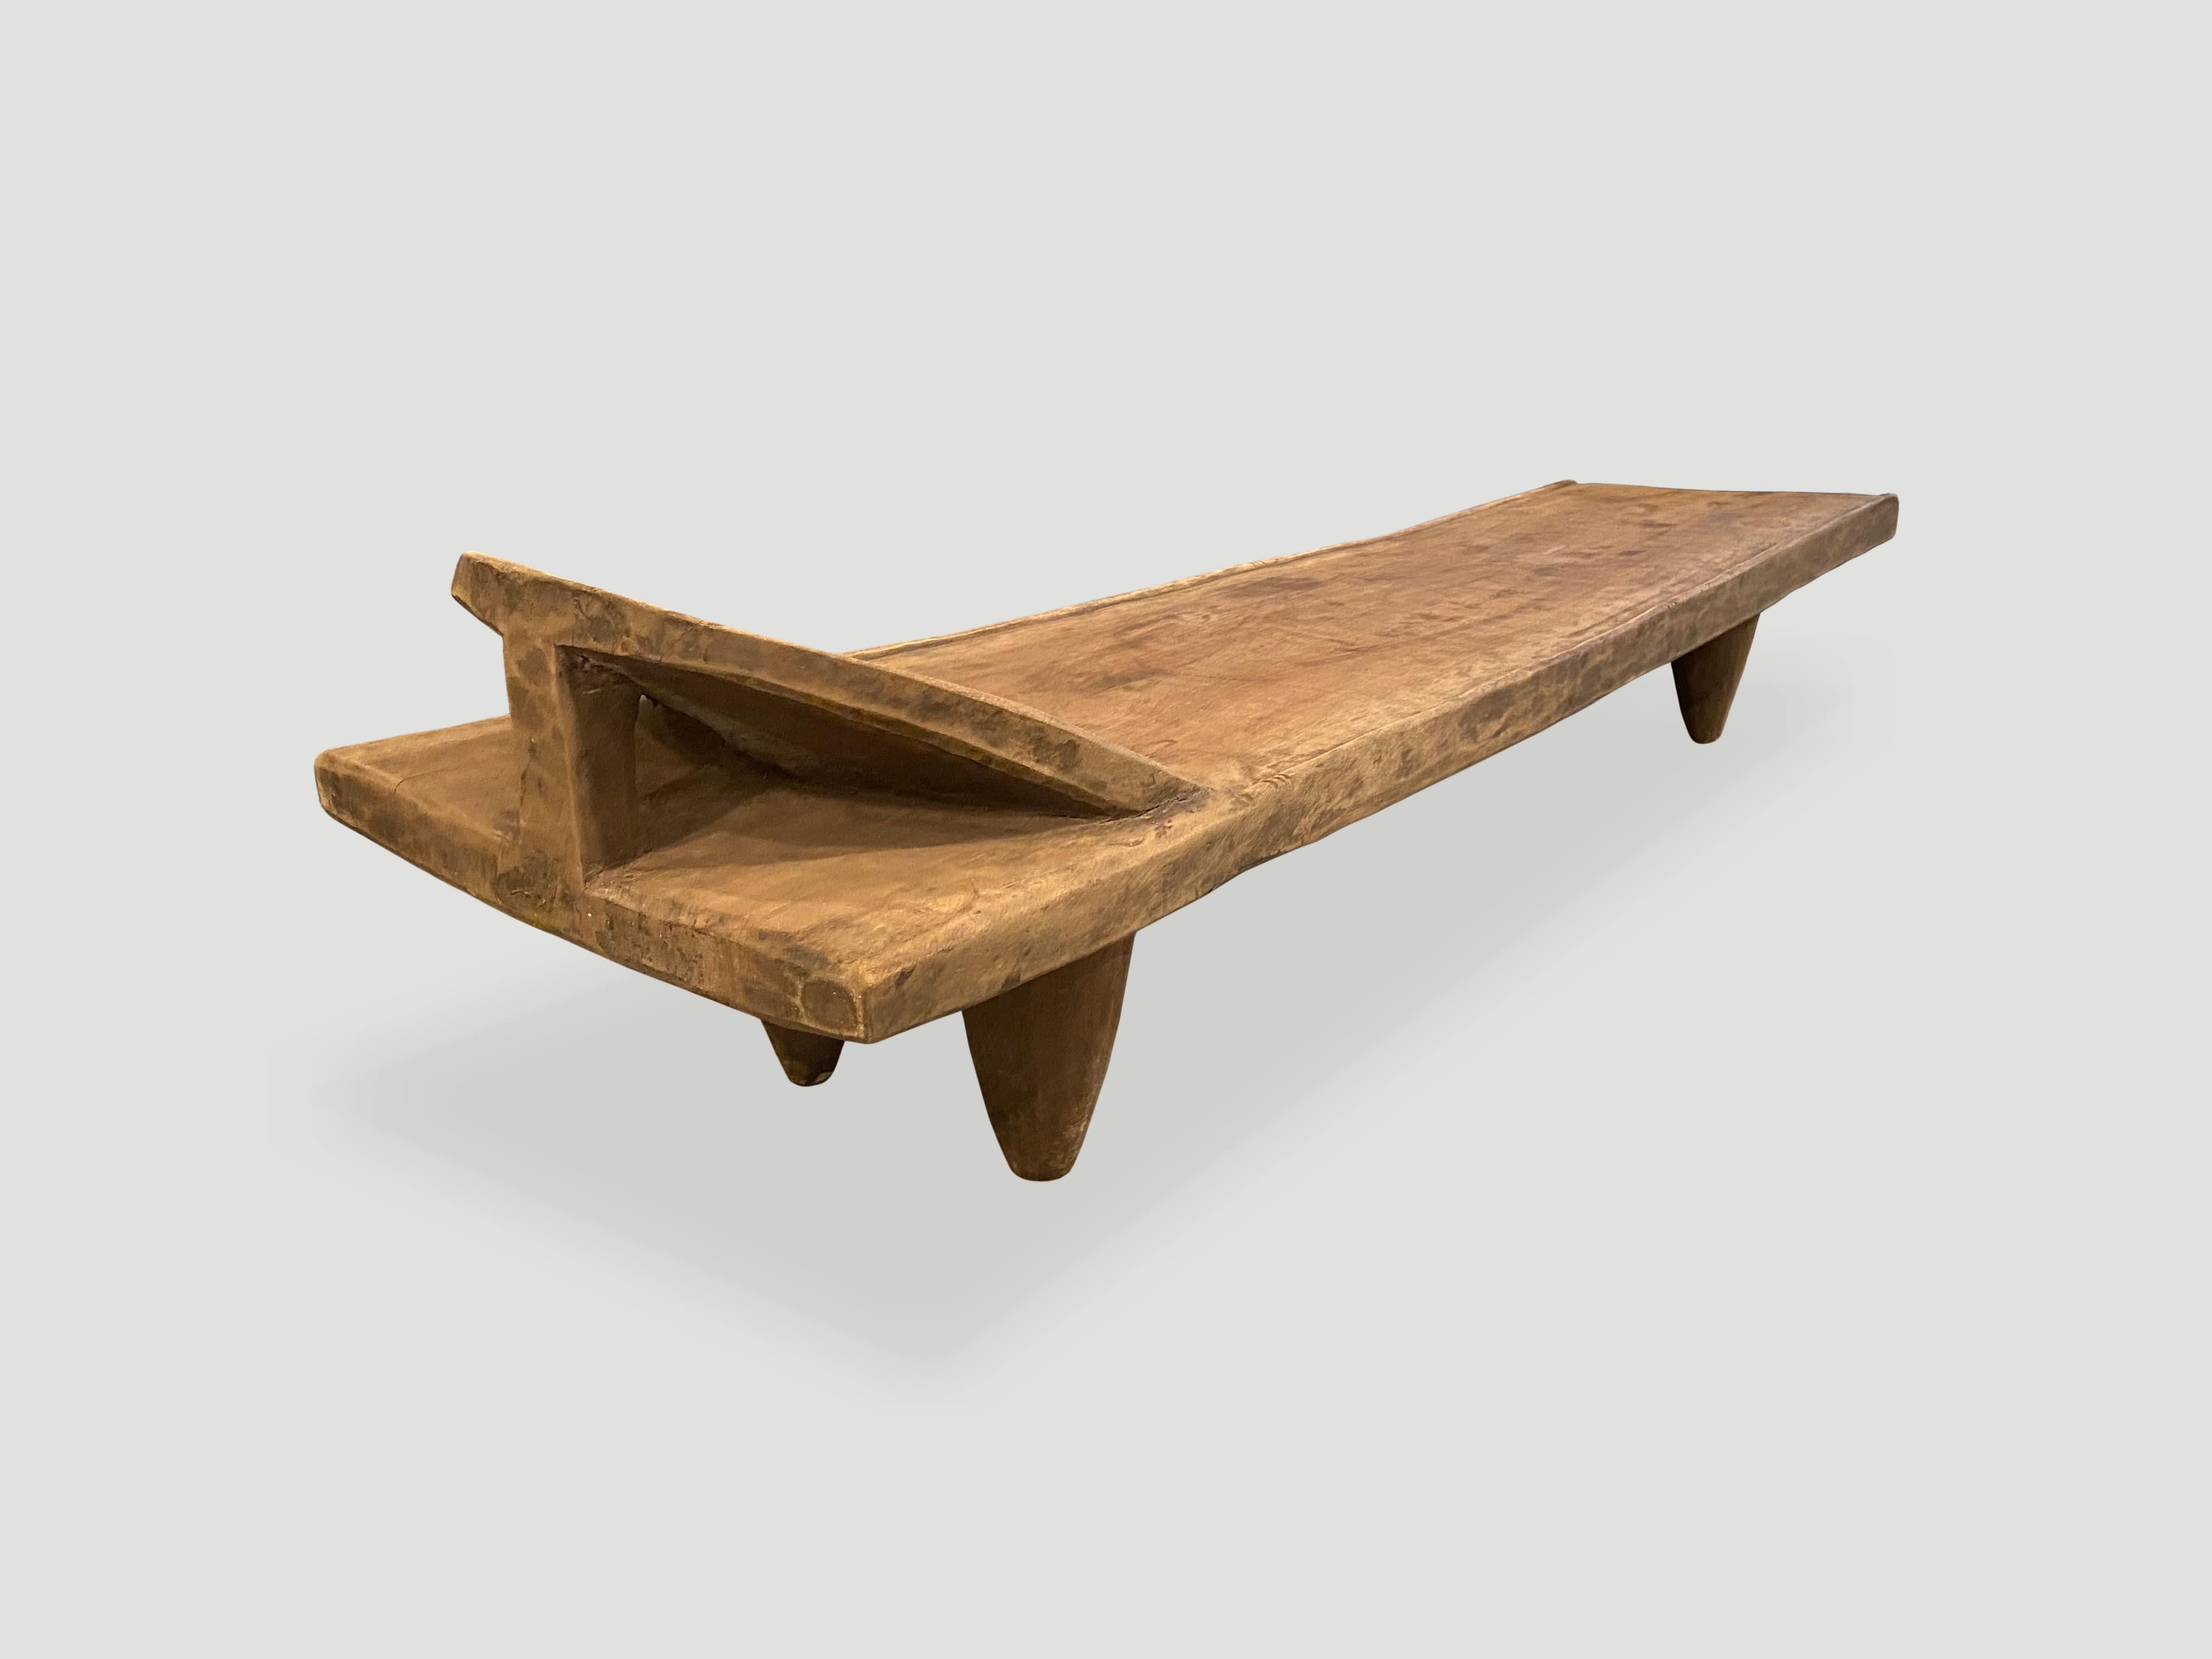 Hand carved by the Senufo tribes from a single block of iroko wood, native to the west coast of Africa. The wood is tough, dense and very durable. Shown with cone style legs and a raised six inch headrest. Originally used as a bed, that can now be